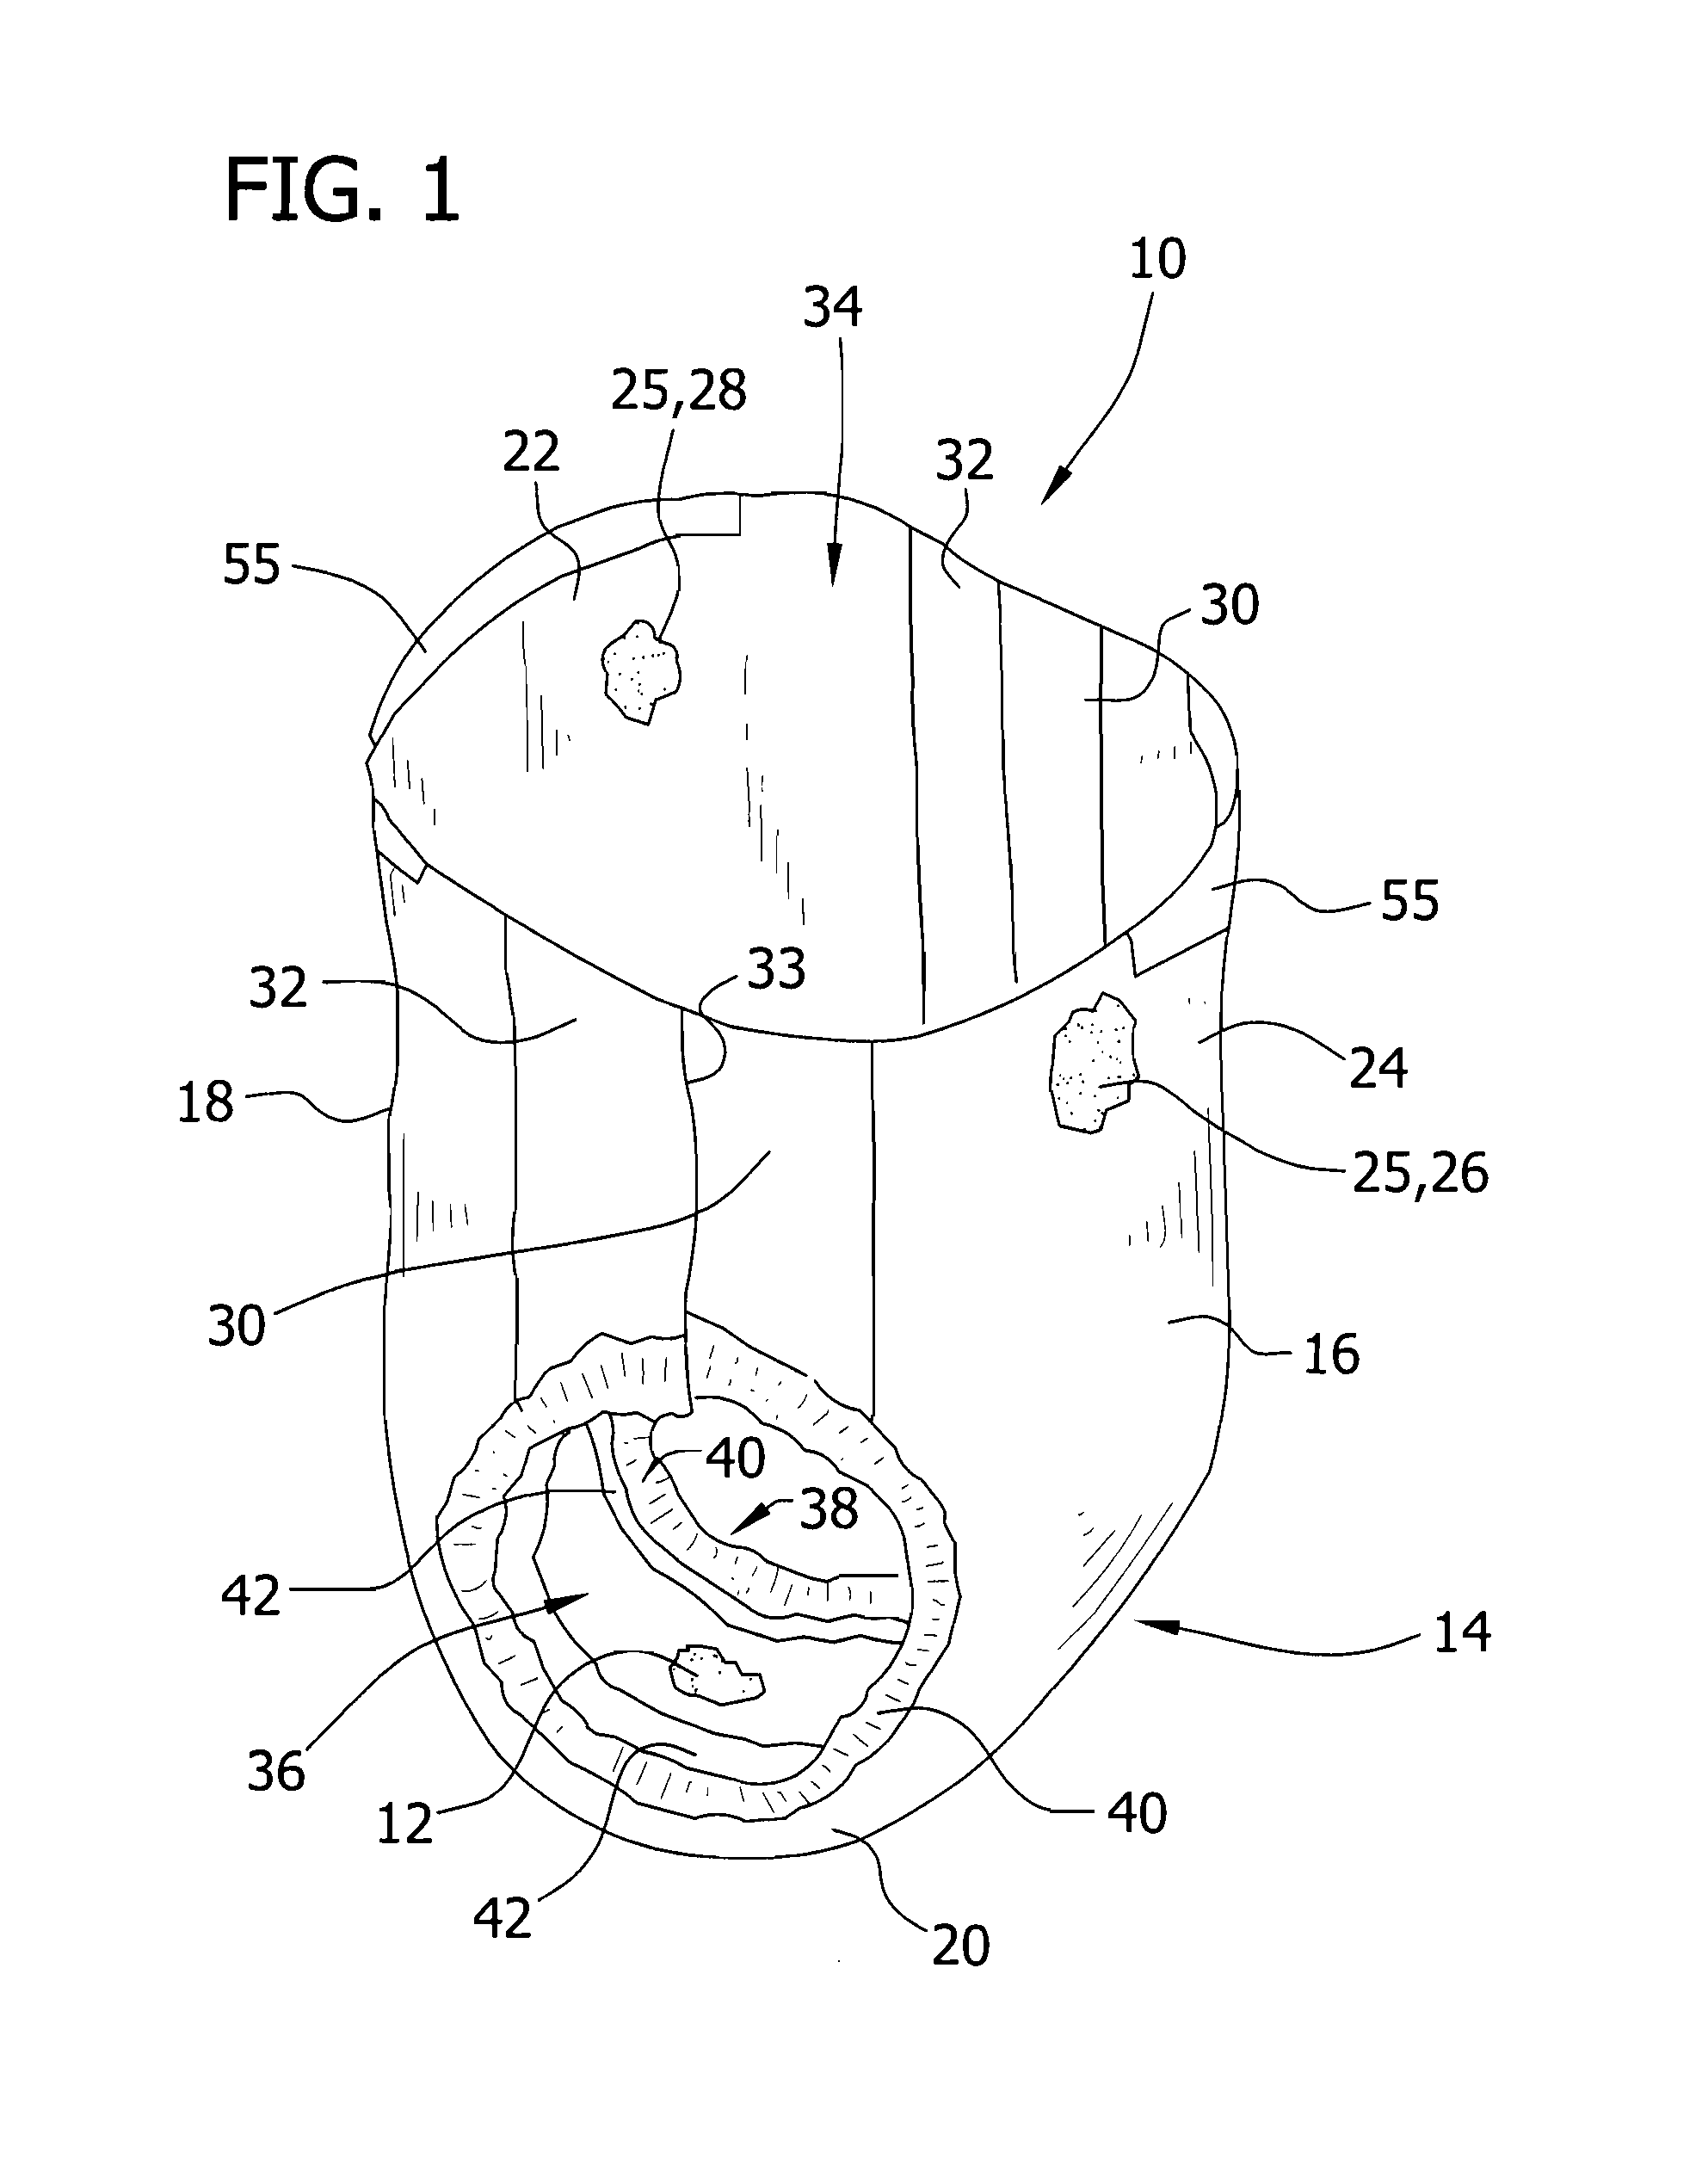 Absorbent article with temperature change member disposed on the outer cover and between absorbent assembly portions